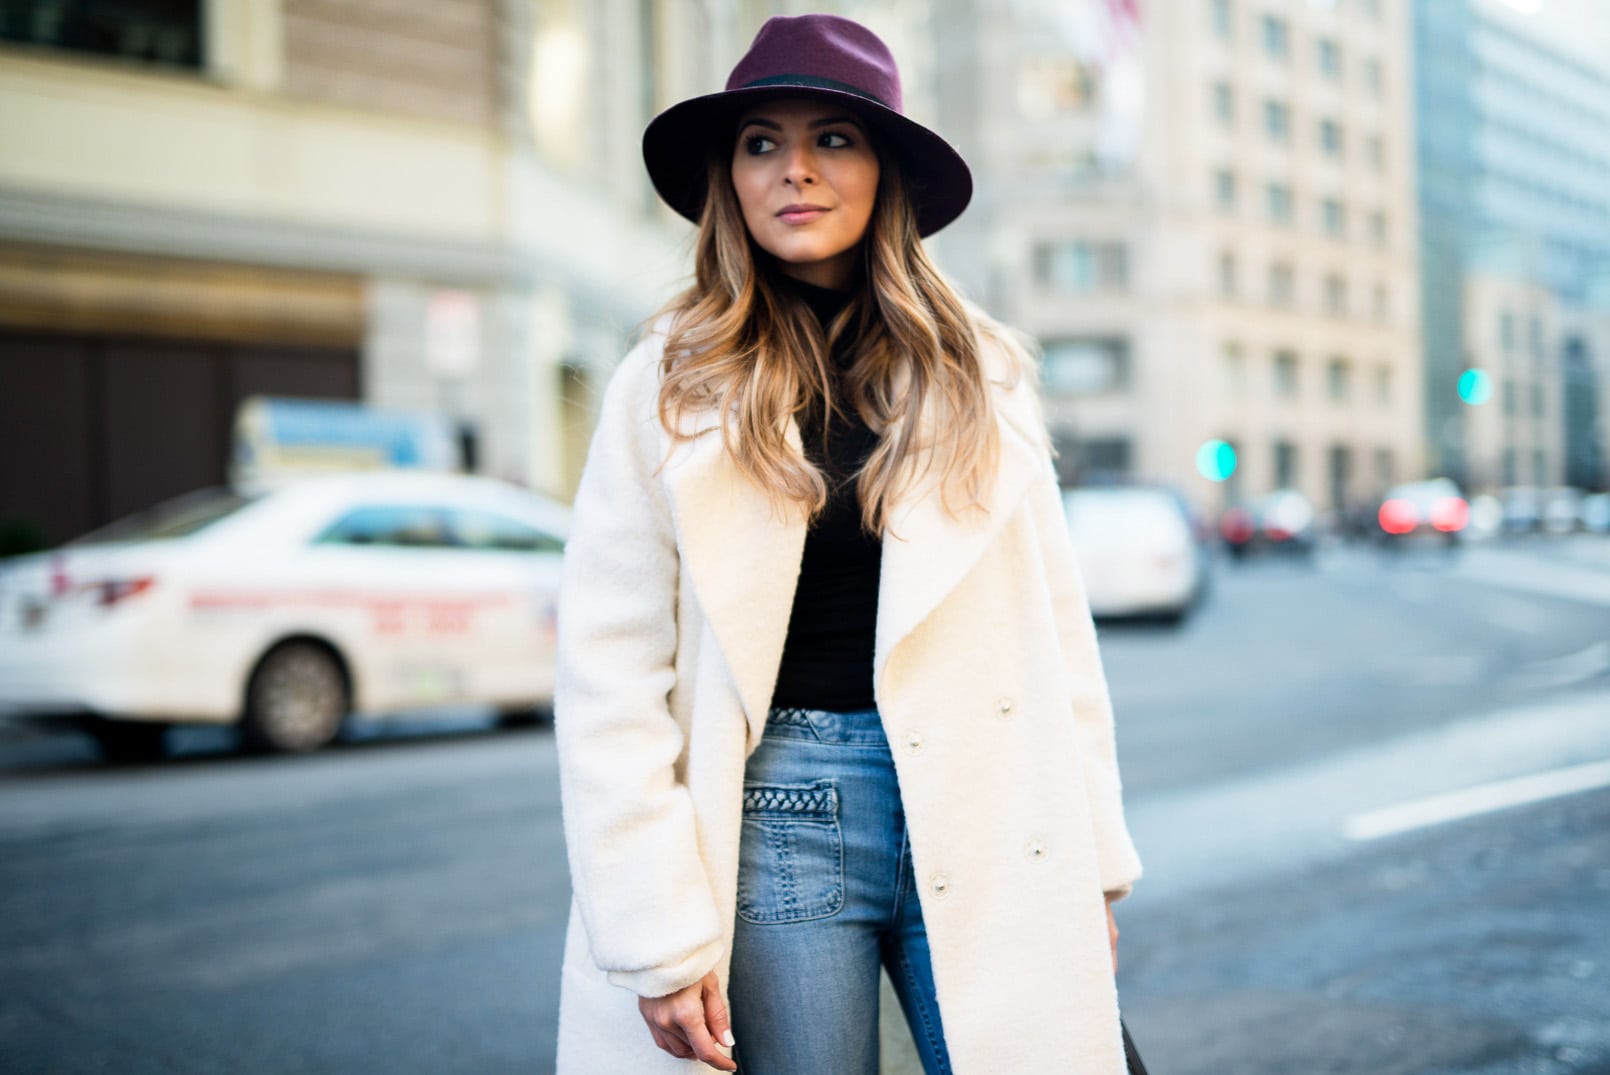 Pam Hetlinger, The Girl From Panama wearing a burgundy hat, asos white oversized coat, 7 for all mankind braided jeans, balenciaga buckle burgundy boots, black turtleneck, How to style a hat in the winter.